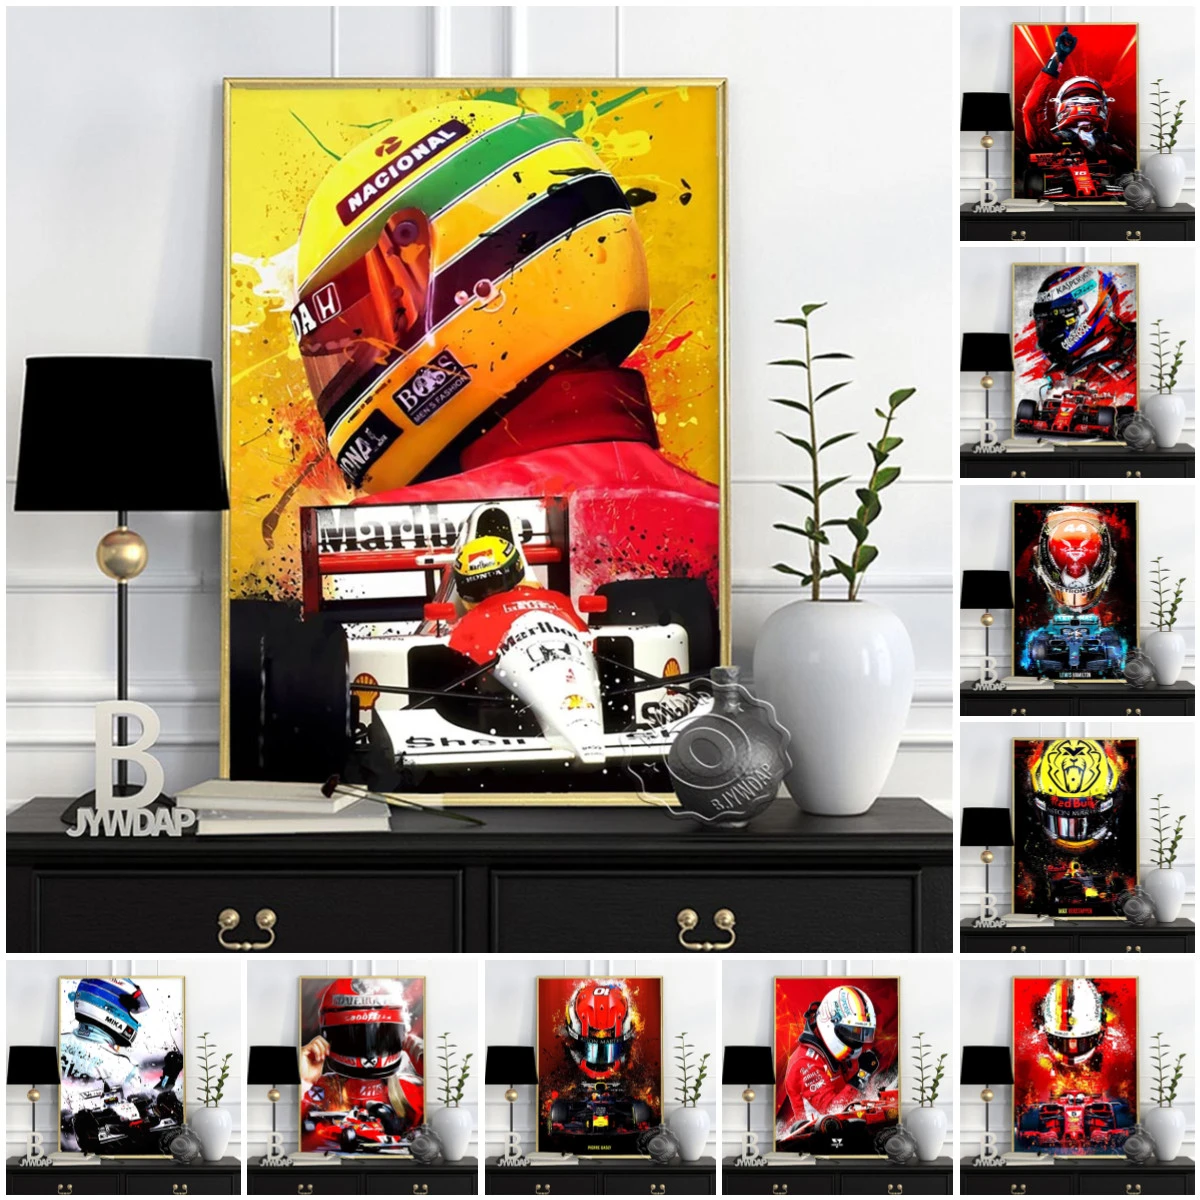 Racing Driver Colored Drawing Prints Poster, Ayrton Senna Legend F1 Charles Leclerc F1 Poster, Racing Fans Collect Art Prints